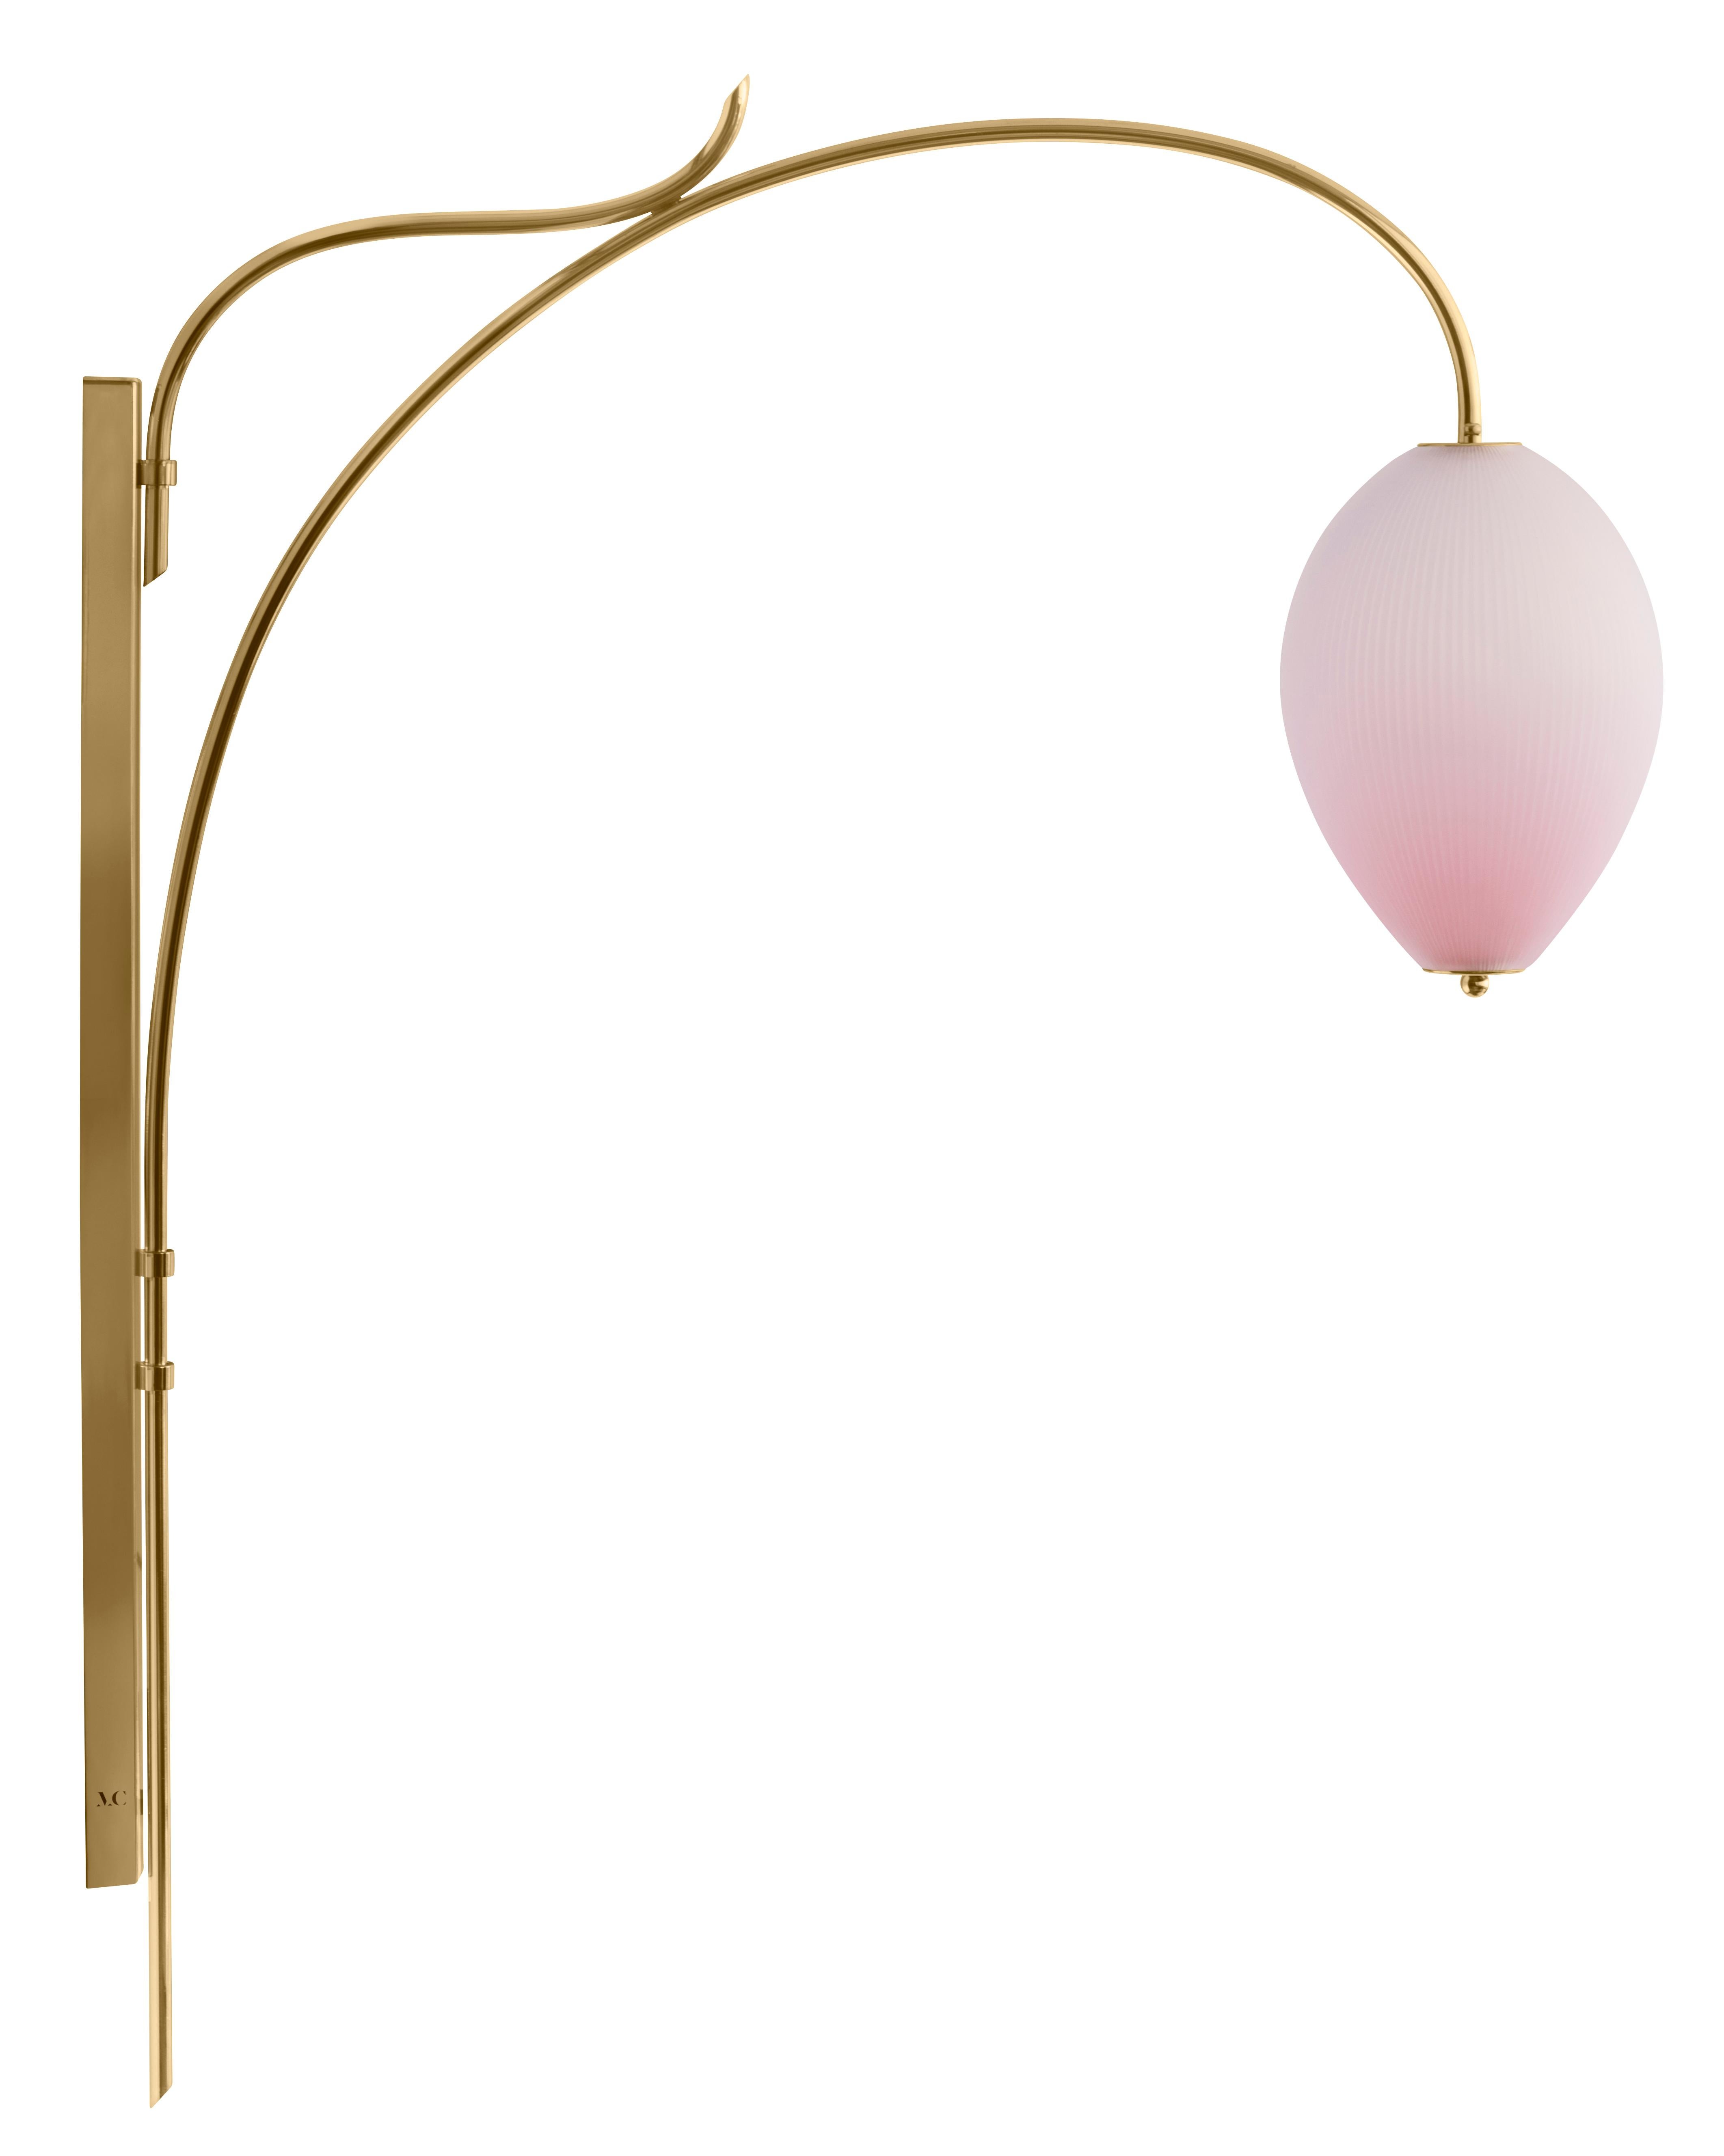 Wall lamp China 10 by Magic Circus Editions
Dimensions: H 134 x W 25.2 x D 113.5 cm
Materials: Brass, mouth blown glass sculpted with a diamond saw
Colour: soft rose

Available finishes: Brass, nickel
Available colours: enamel soft white, soft